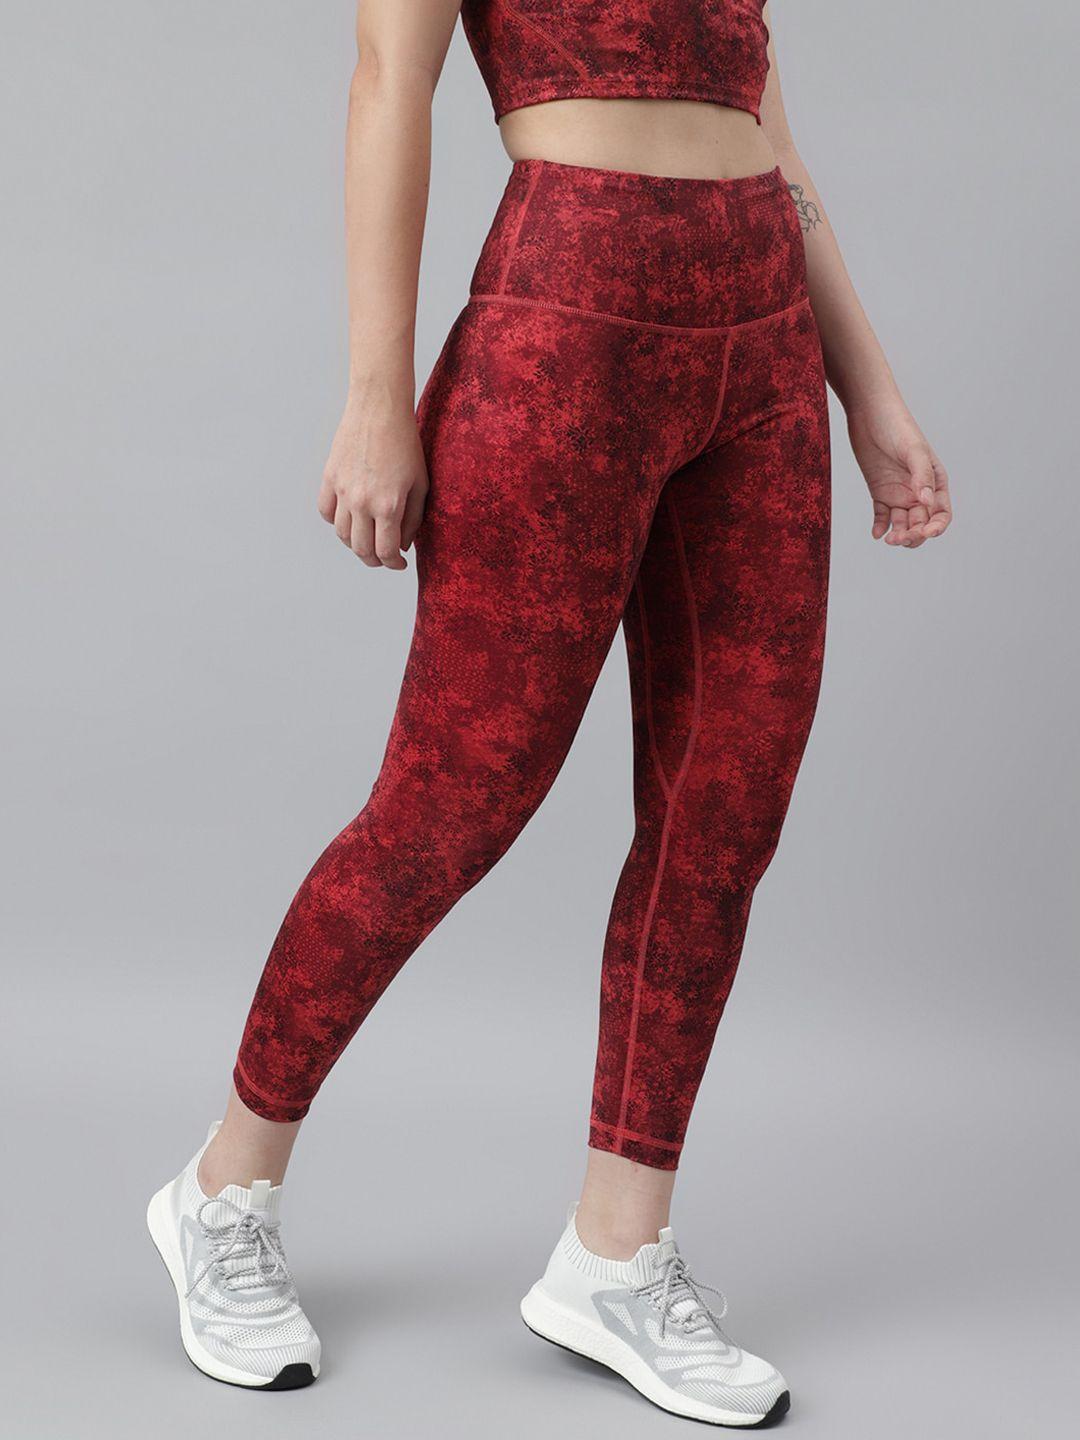 woods printed antimicrobial sports tights